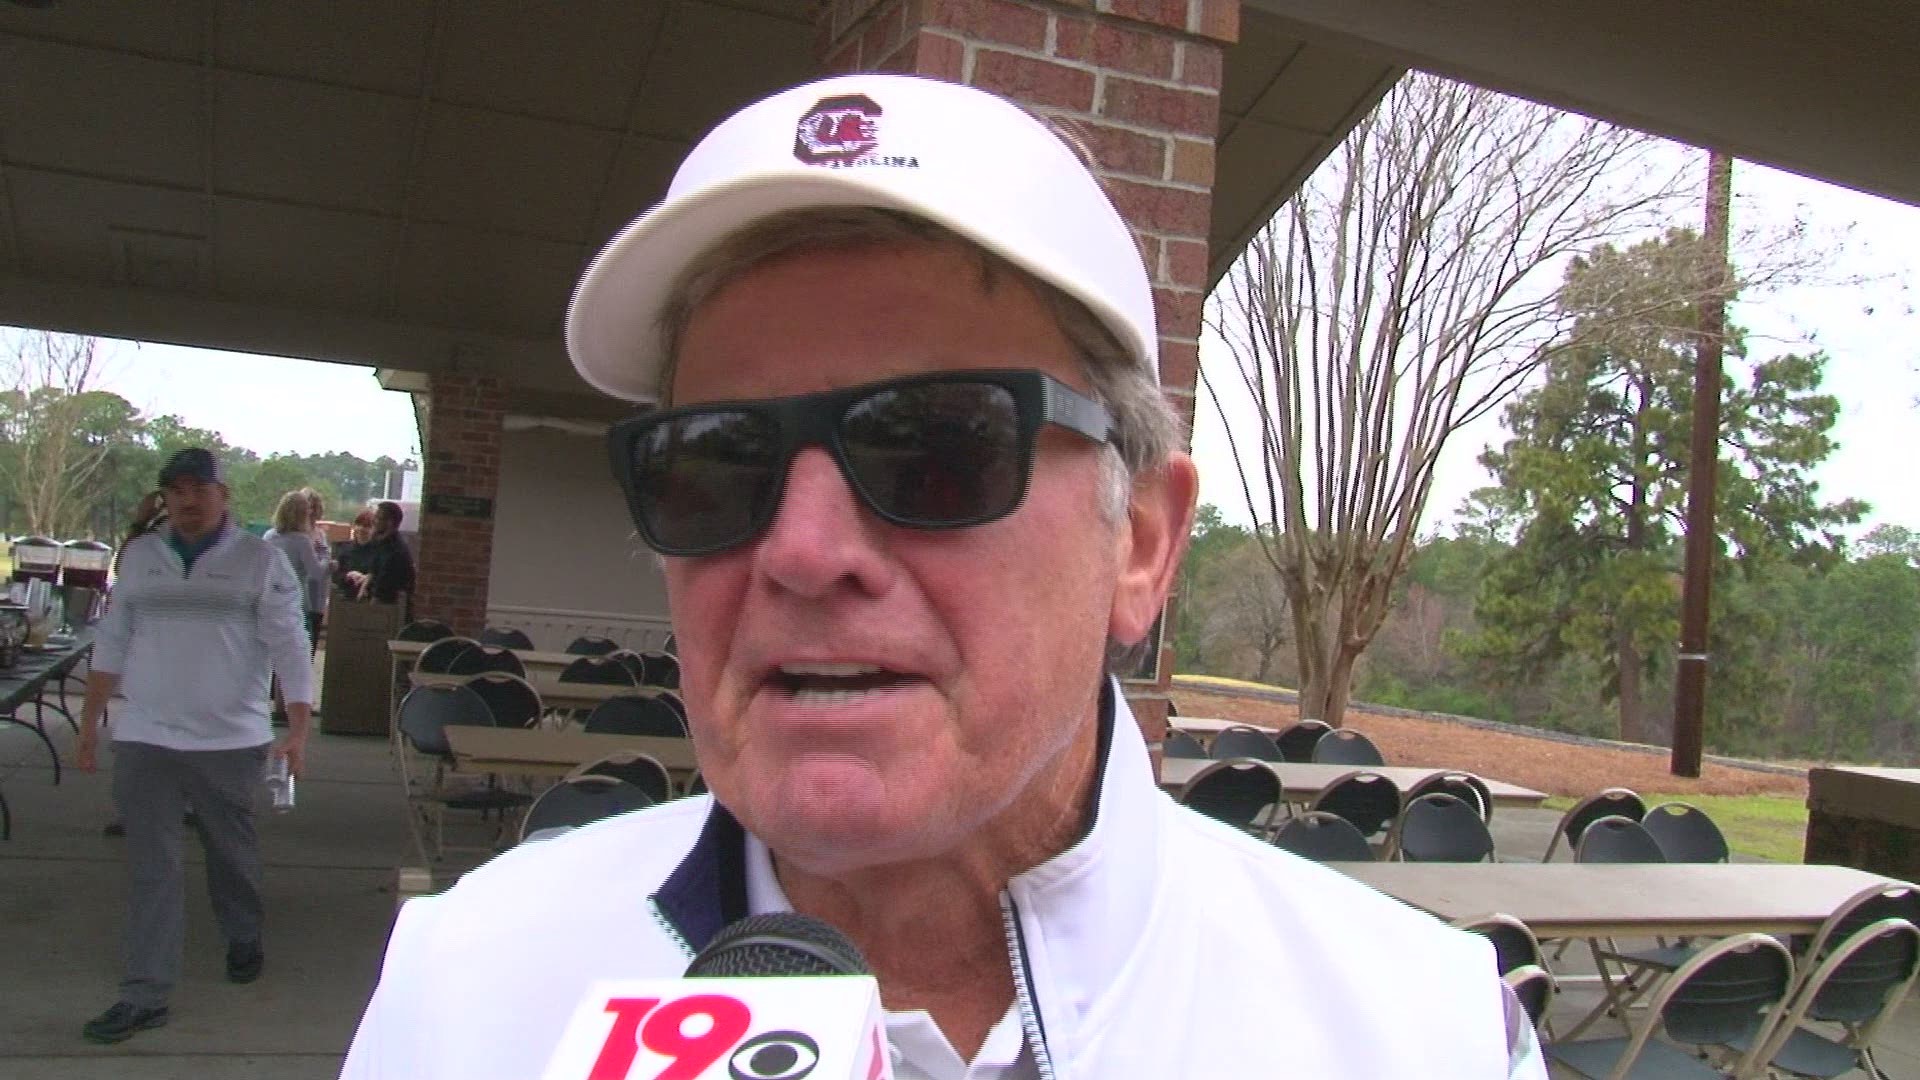 Steve Spurrier is back in Columbia this weekend for golf and Gamecock spring football and he took out the time to confirm his consideration of coaching again. He also talked about the women's basketball team and stated that A'ja Wilson and Dawn Staley are